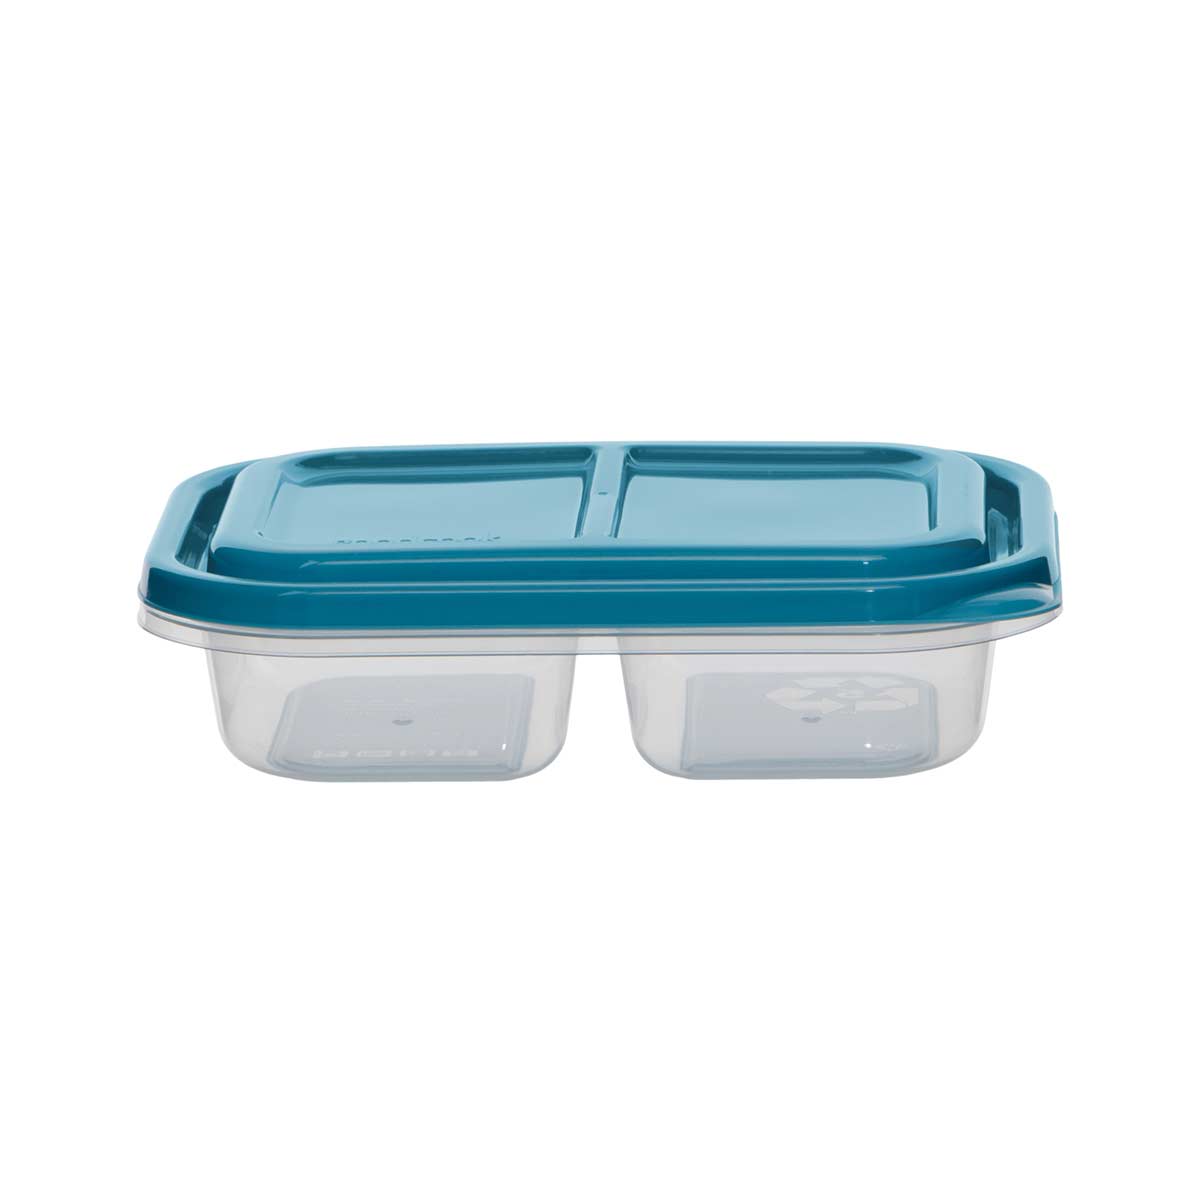 https://www.goodcook.com/media/catalog/product/g/o/goodcook-everyware-snack-pack-container-002.jpg?auto=webp&format=pjpg